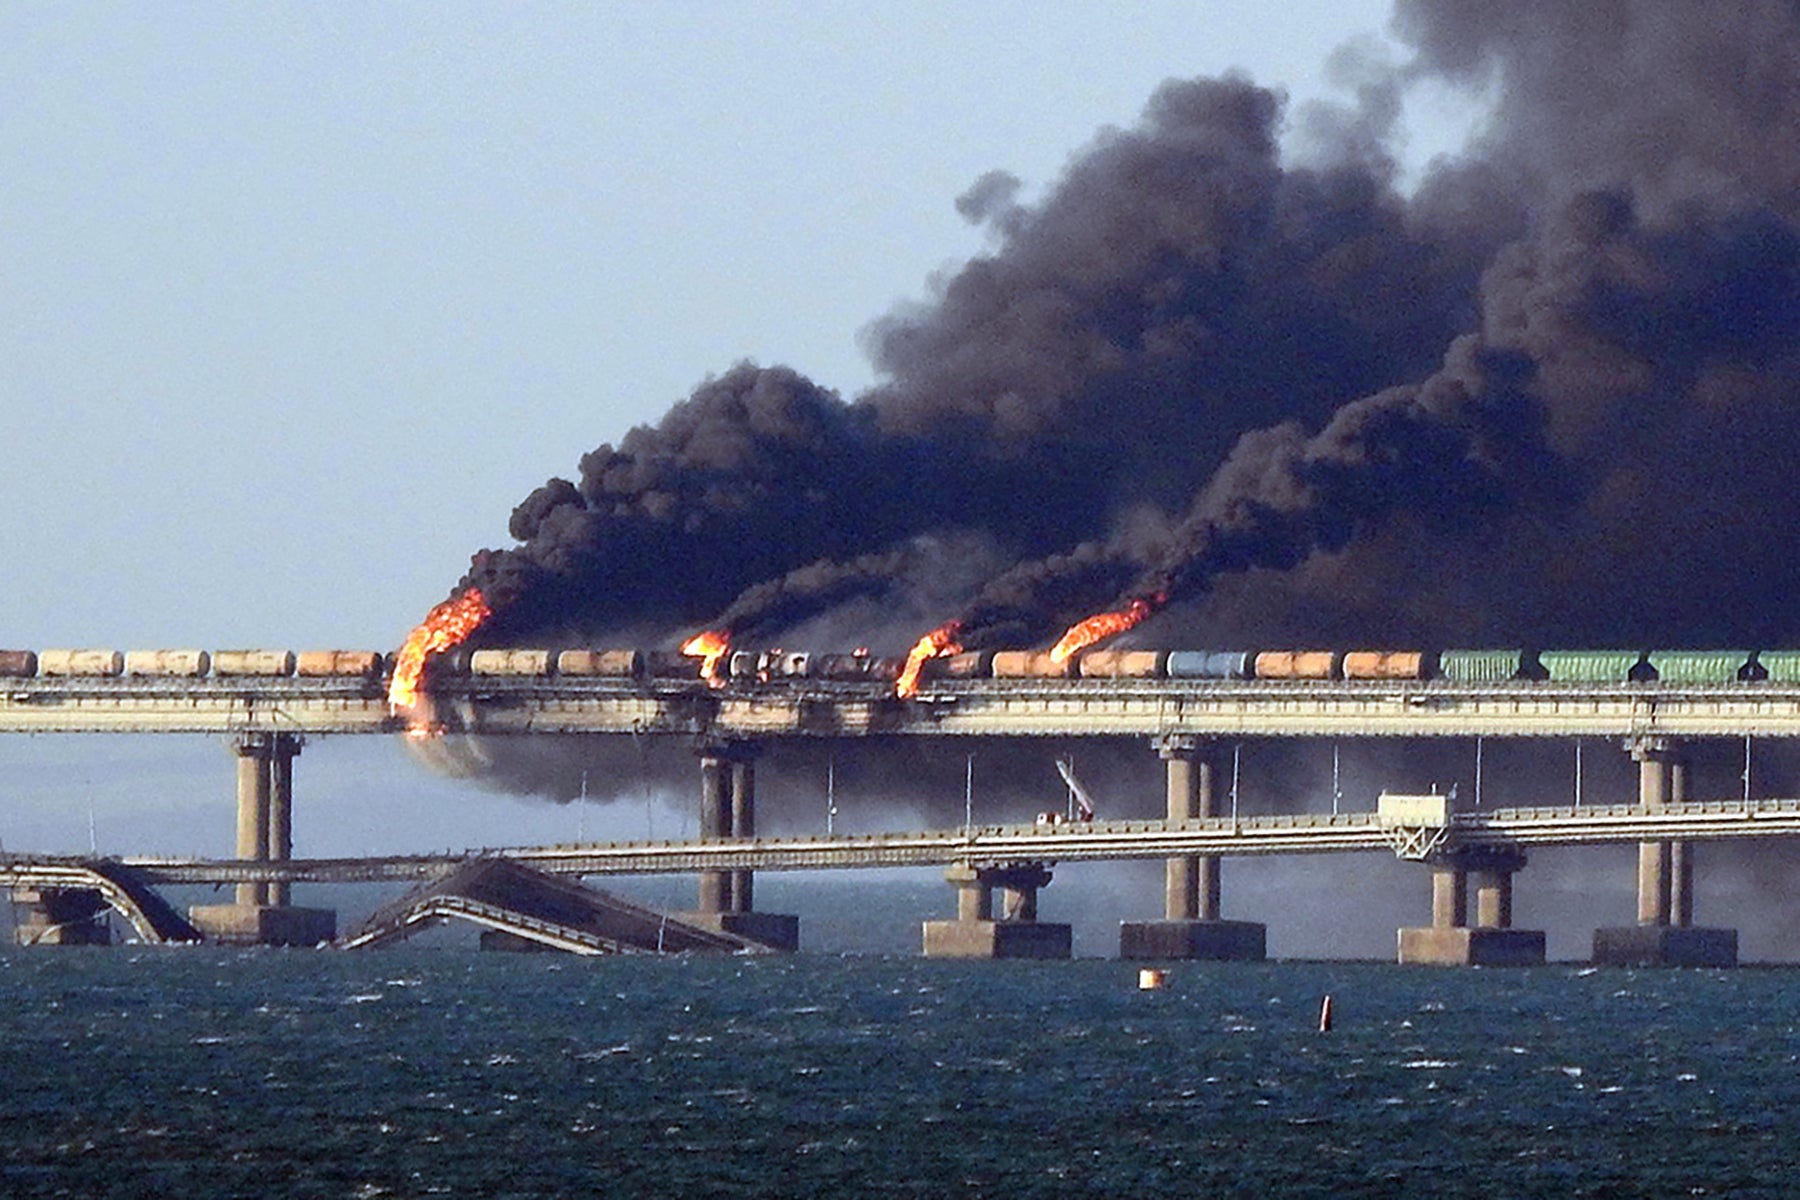 Crimea’s Kerch bridge on fire after an attack in October 2022